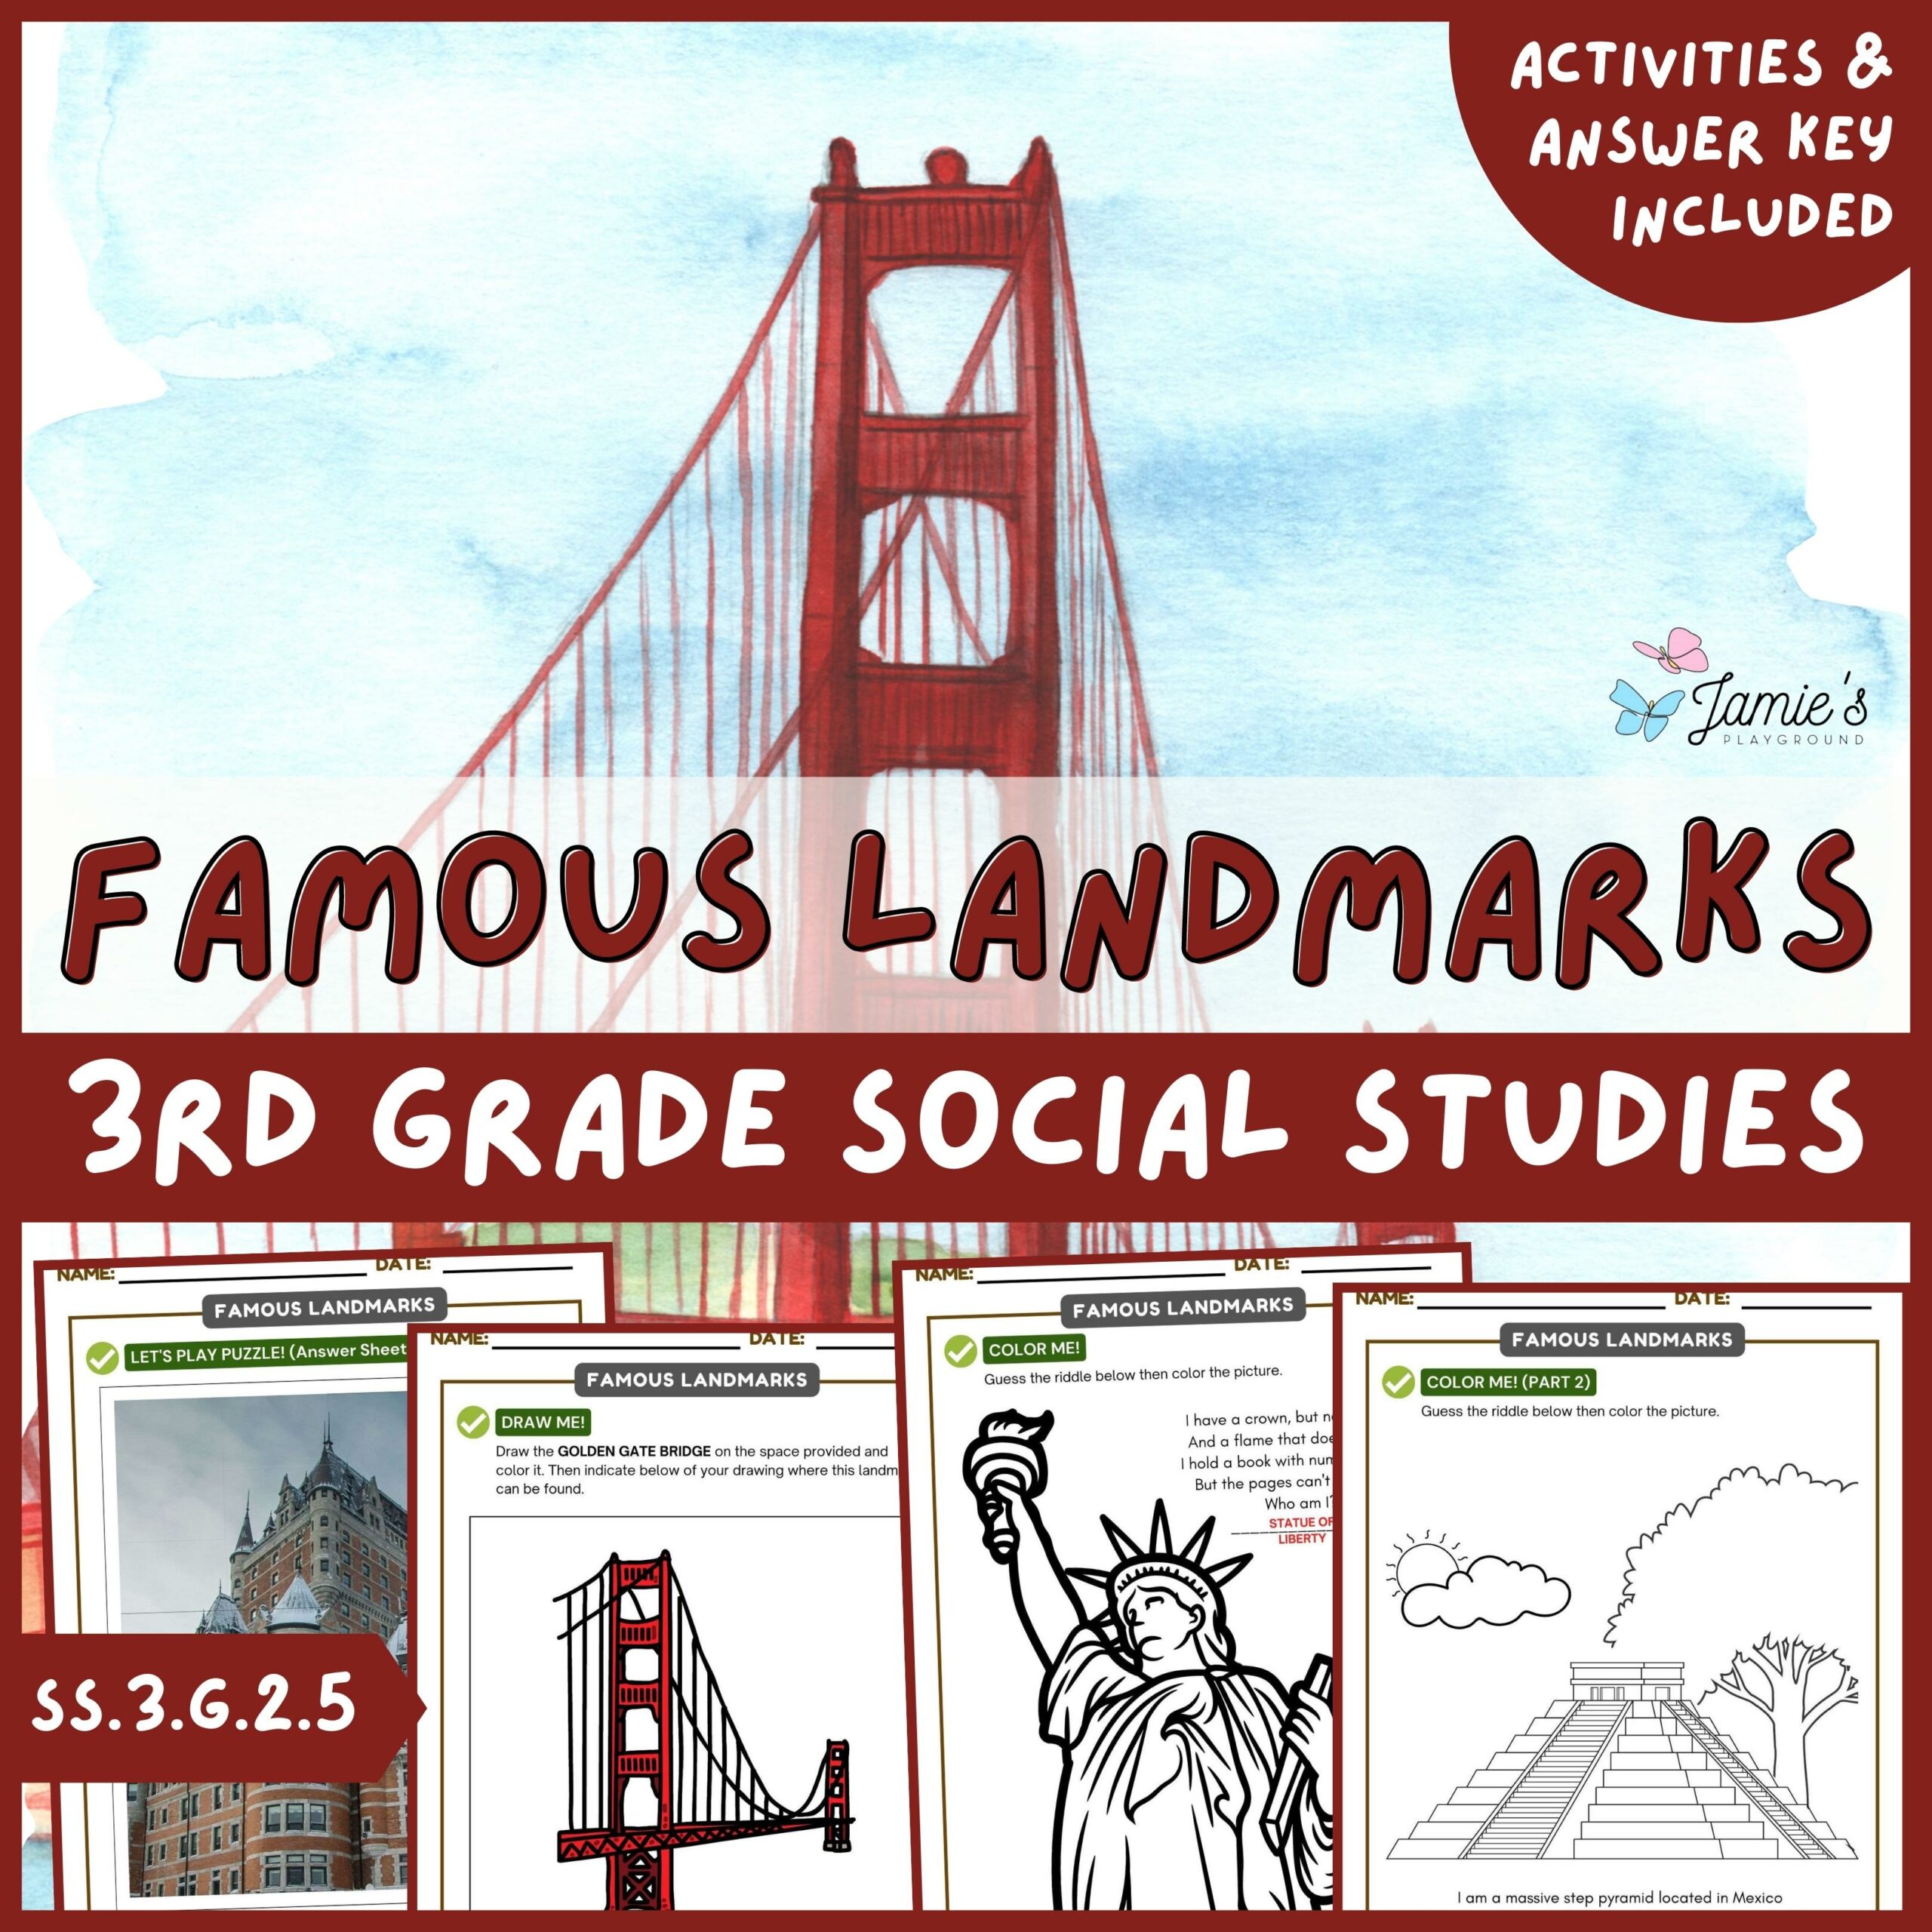 Famous Landmarks: 3rd Grade Social Studies - ACTIVITIES + ANSWER KEY's featured image